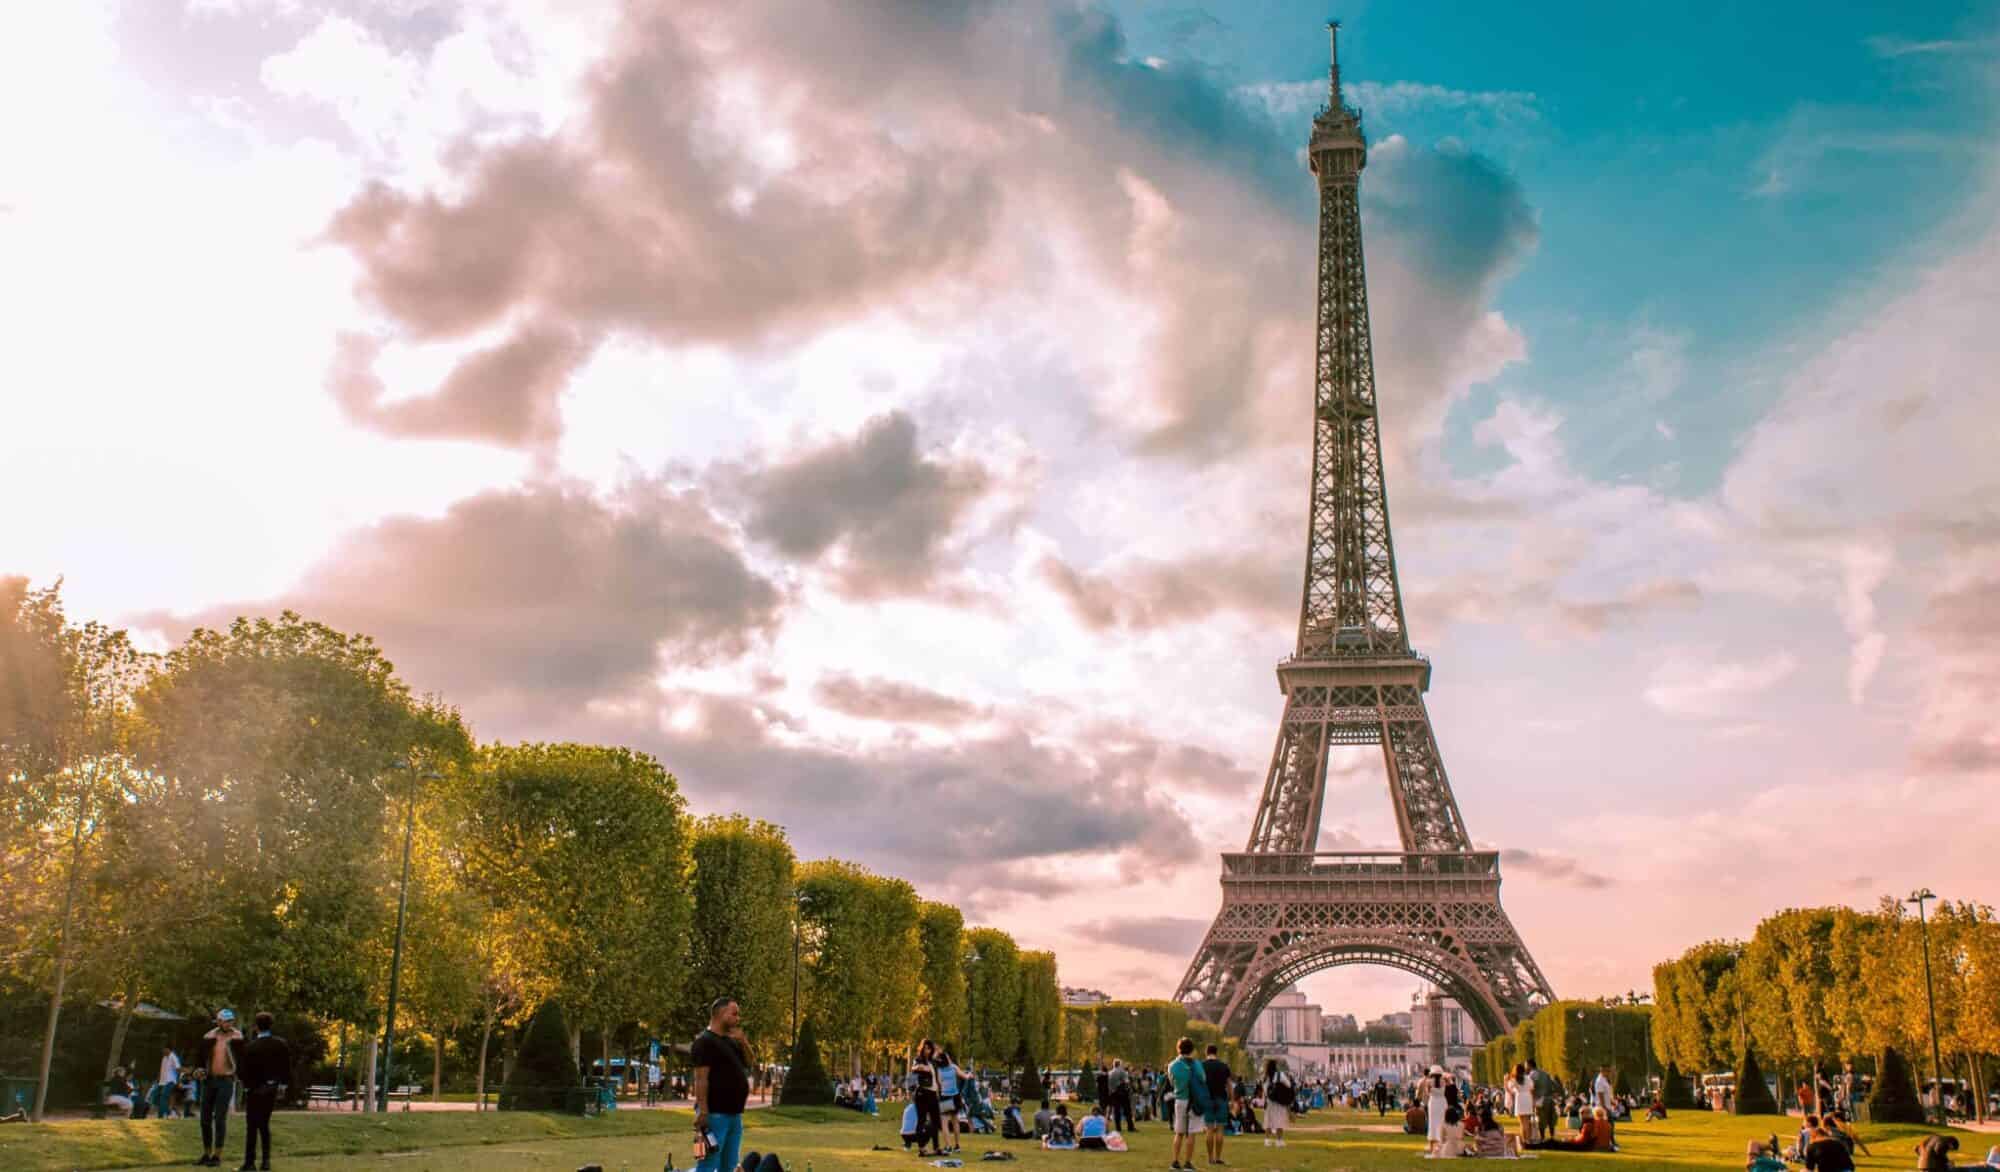 The Eiffel Tower shines at sunset while Parisians enjoy their picnics in a green field called Champ de Mars.